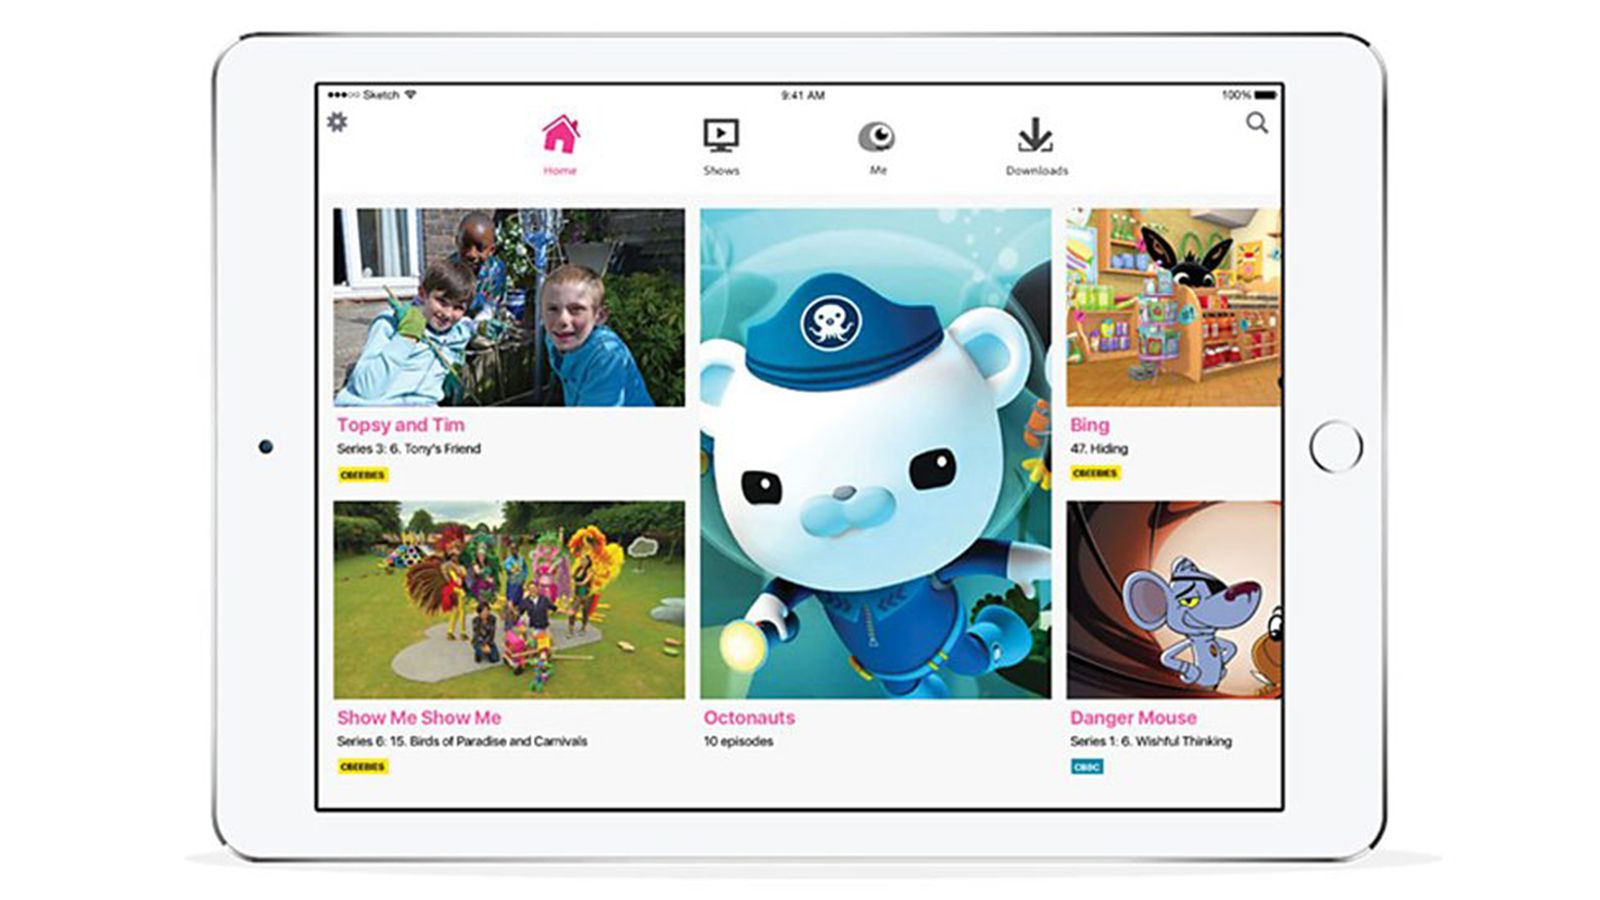 bbc iplayer kids is here to make viewing safer and simpler image 1